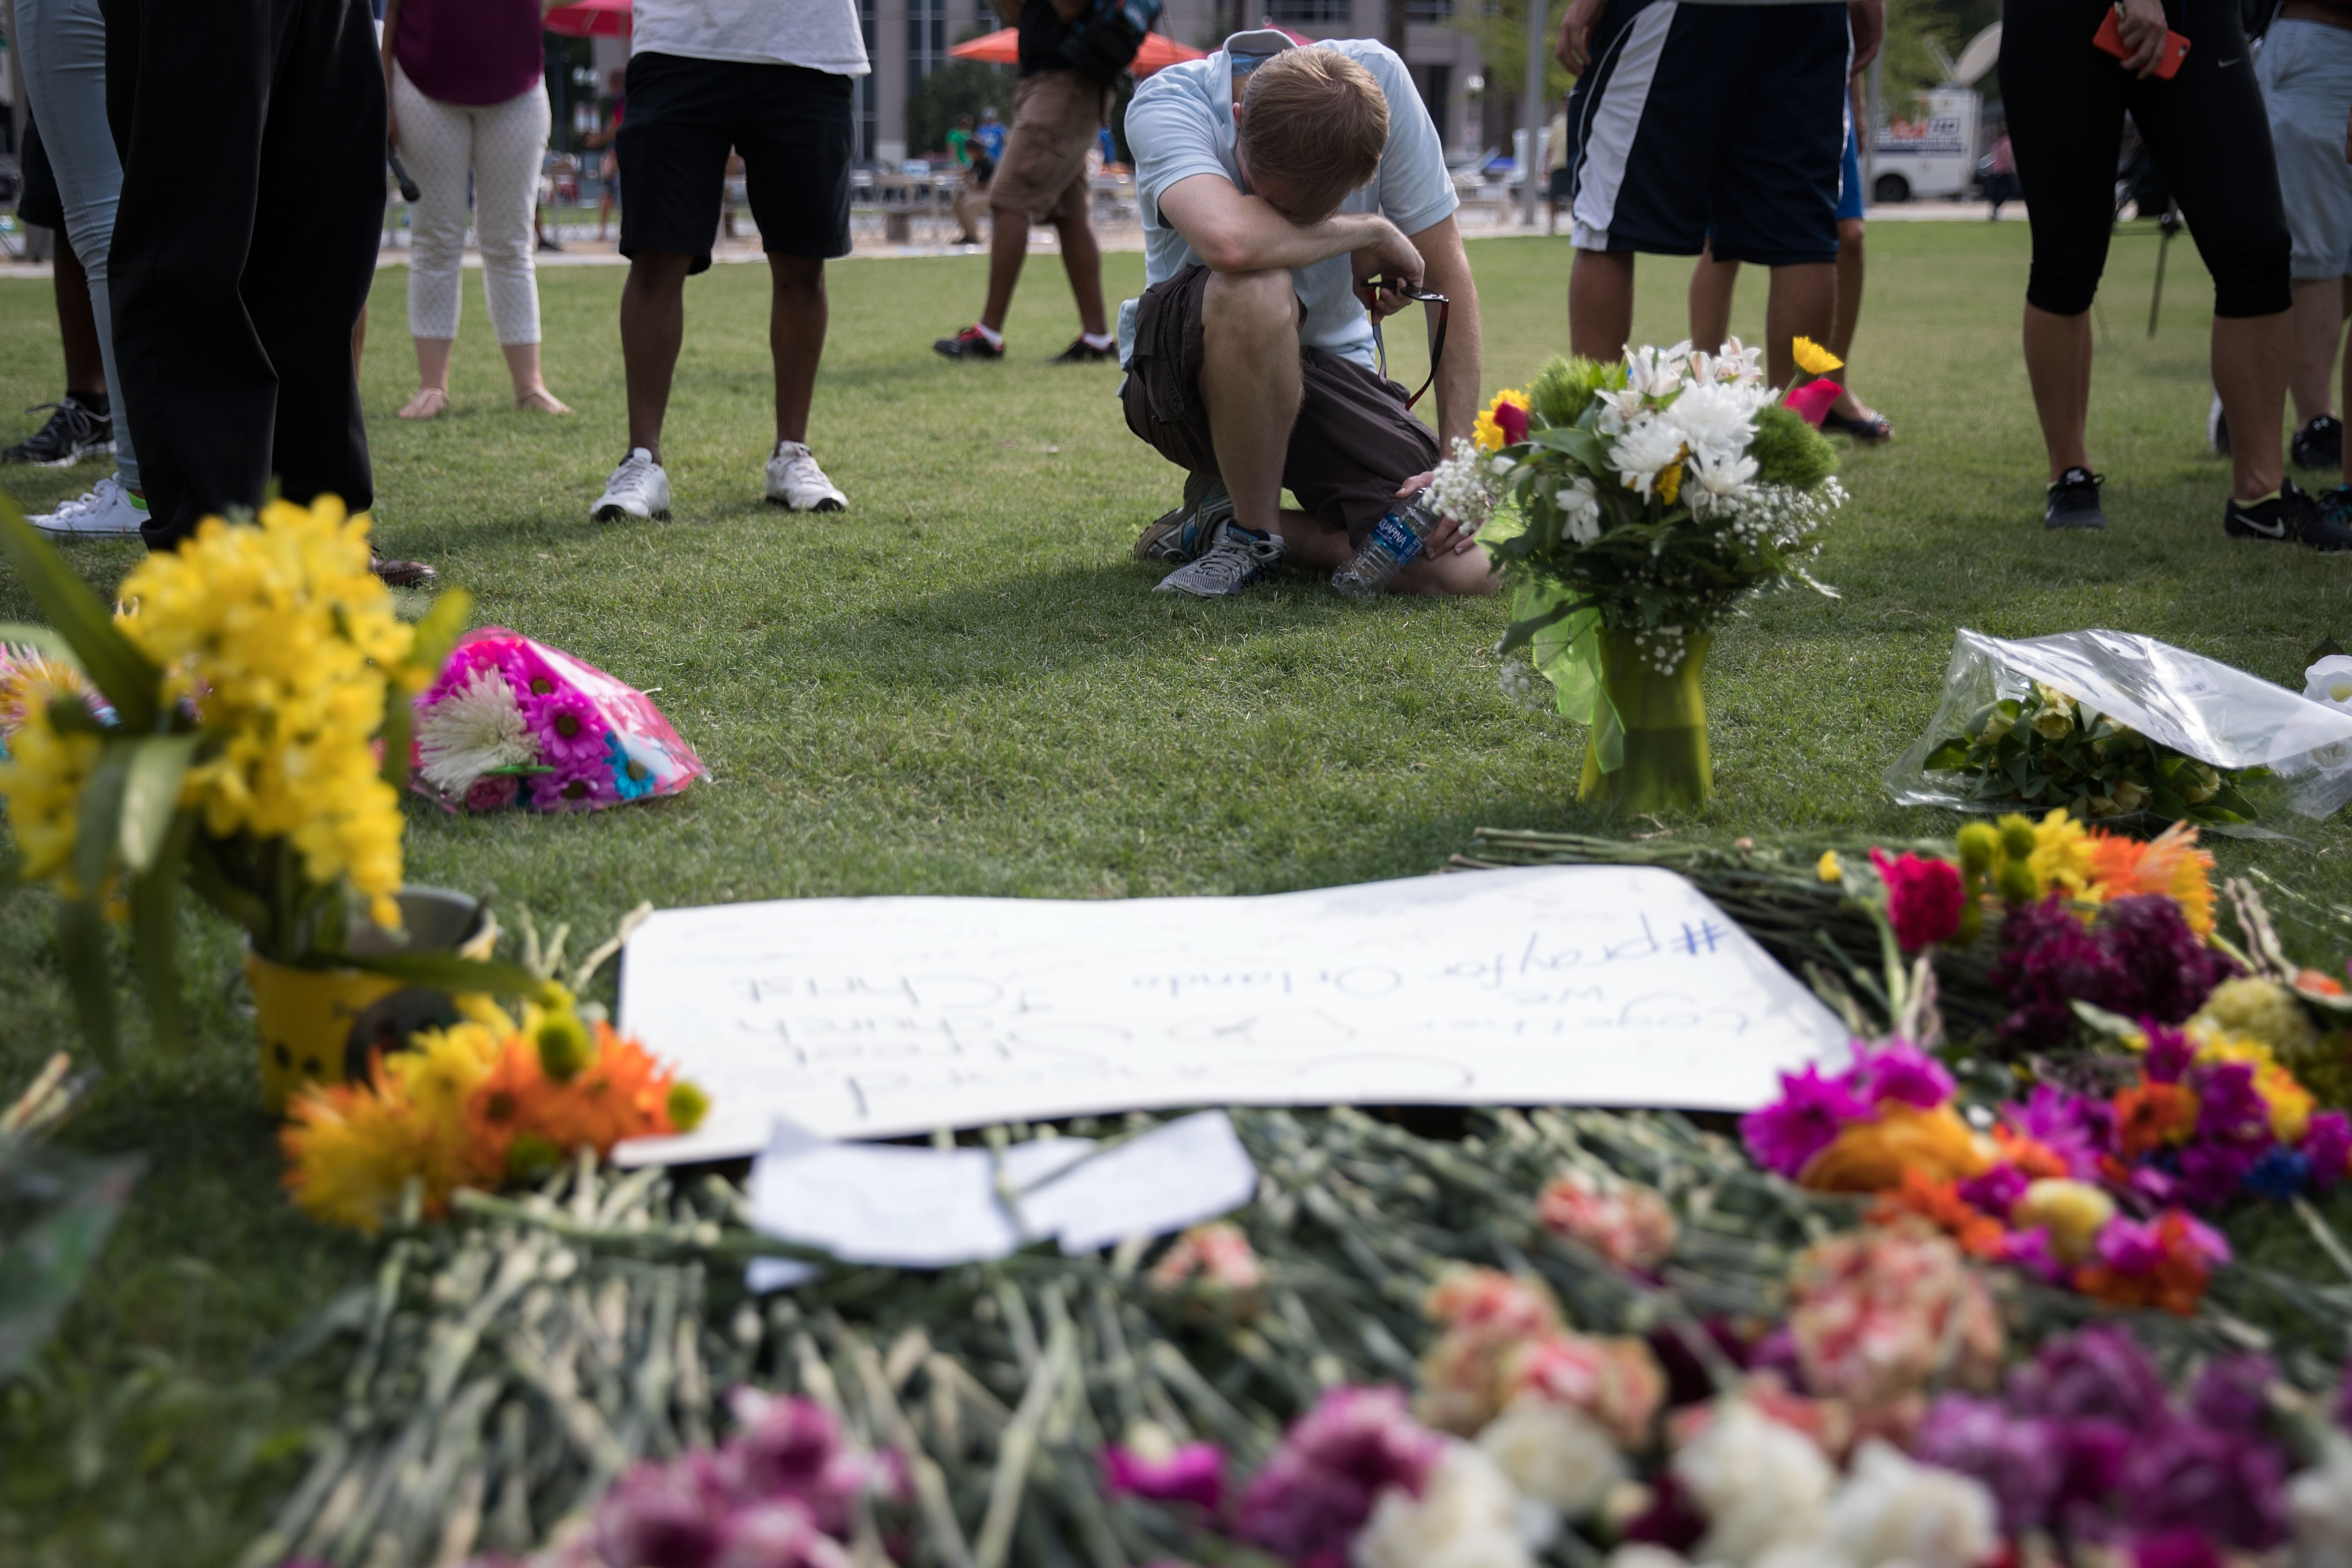 ORLANDO, FL - JUNE 13: Mike Graham of Orlando bows his head at a makeshift memorial prior to an evening vigil for the victims of the Pulse Nightclub shootings, at the Dr. Phillips Center for the Performing Arts, June 13, 2016 in Orlando, Florida. The shooting at Pulse Nightclub, which killed 49 people and injured 53, is the worst mass-shooting event in American history. Drew Angerer/Getty Images/AFP